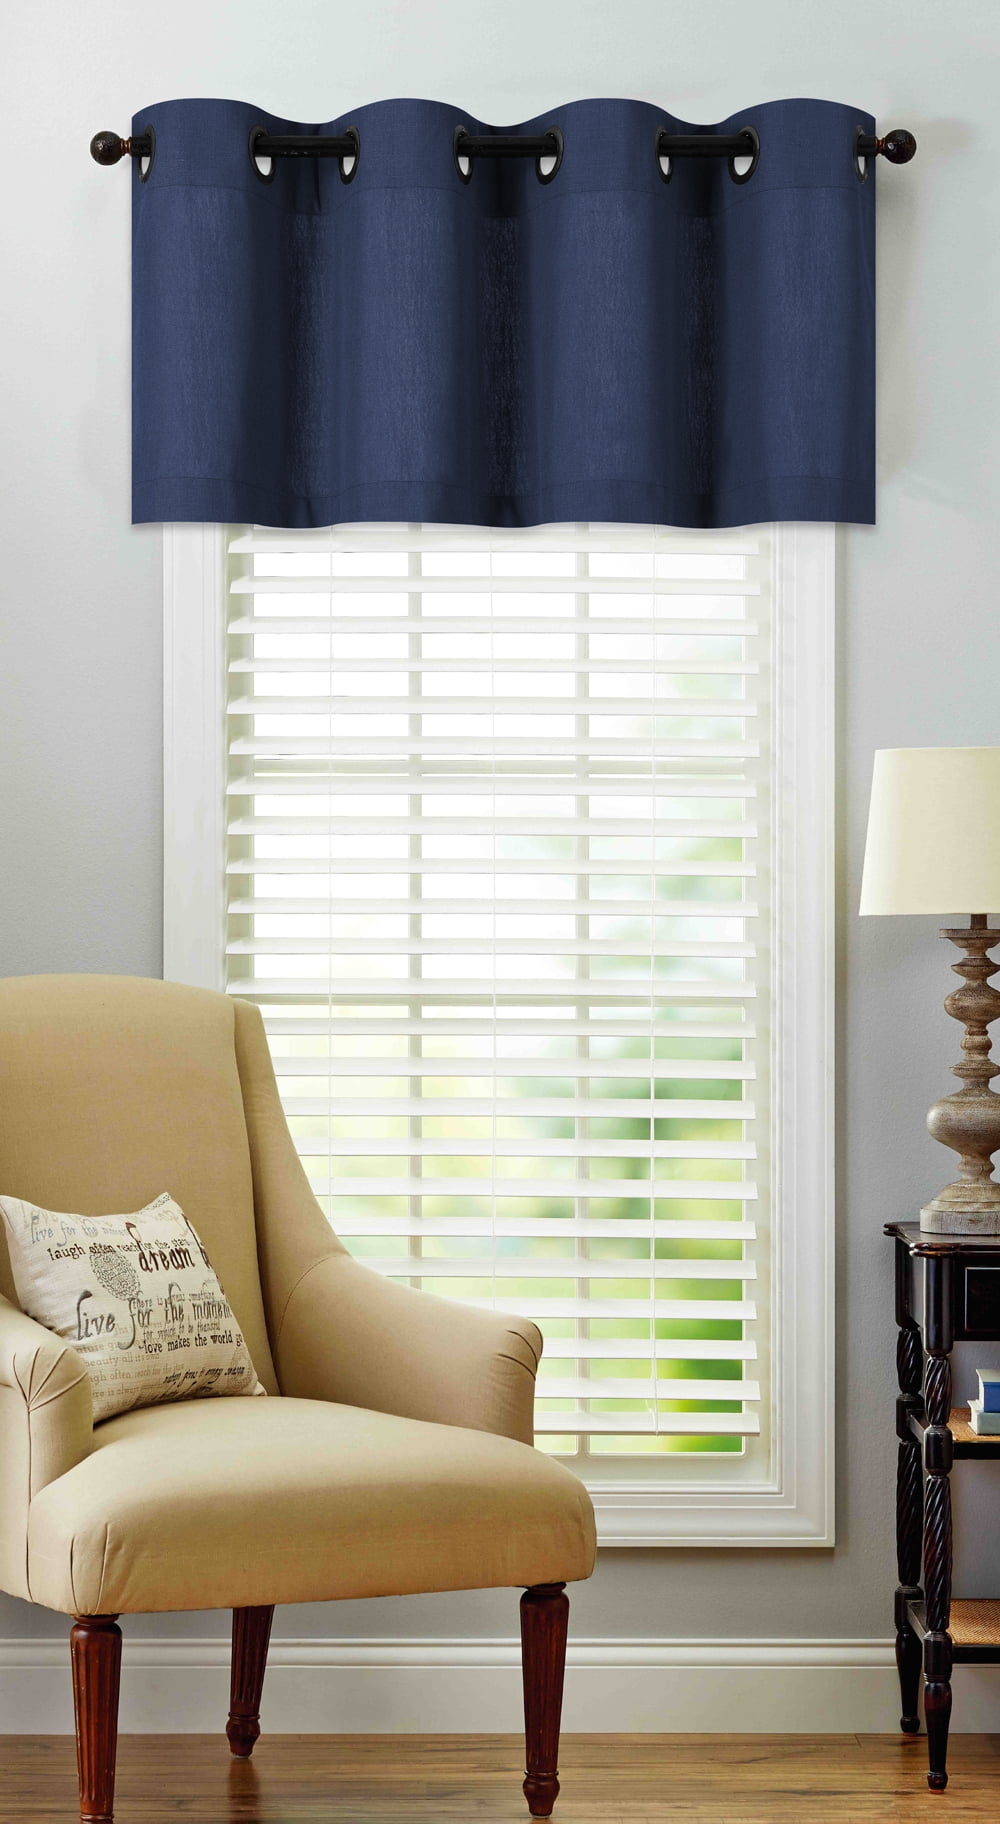 Navy Assorted Colors, Regal Home Collections Luxurious Oversized Grommet Top Window Valance